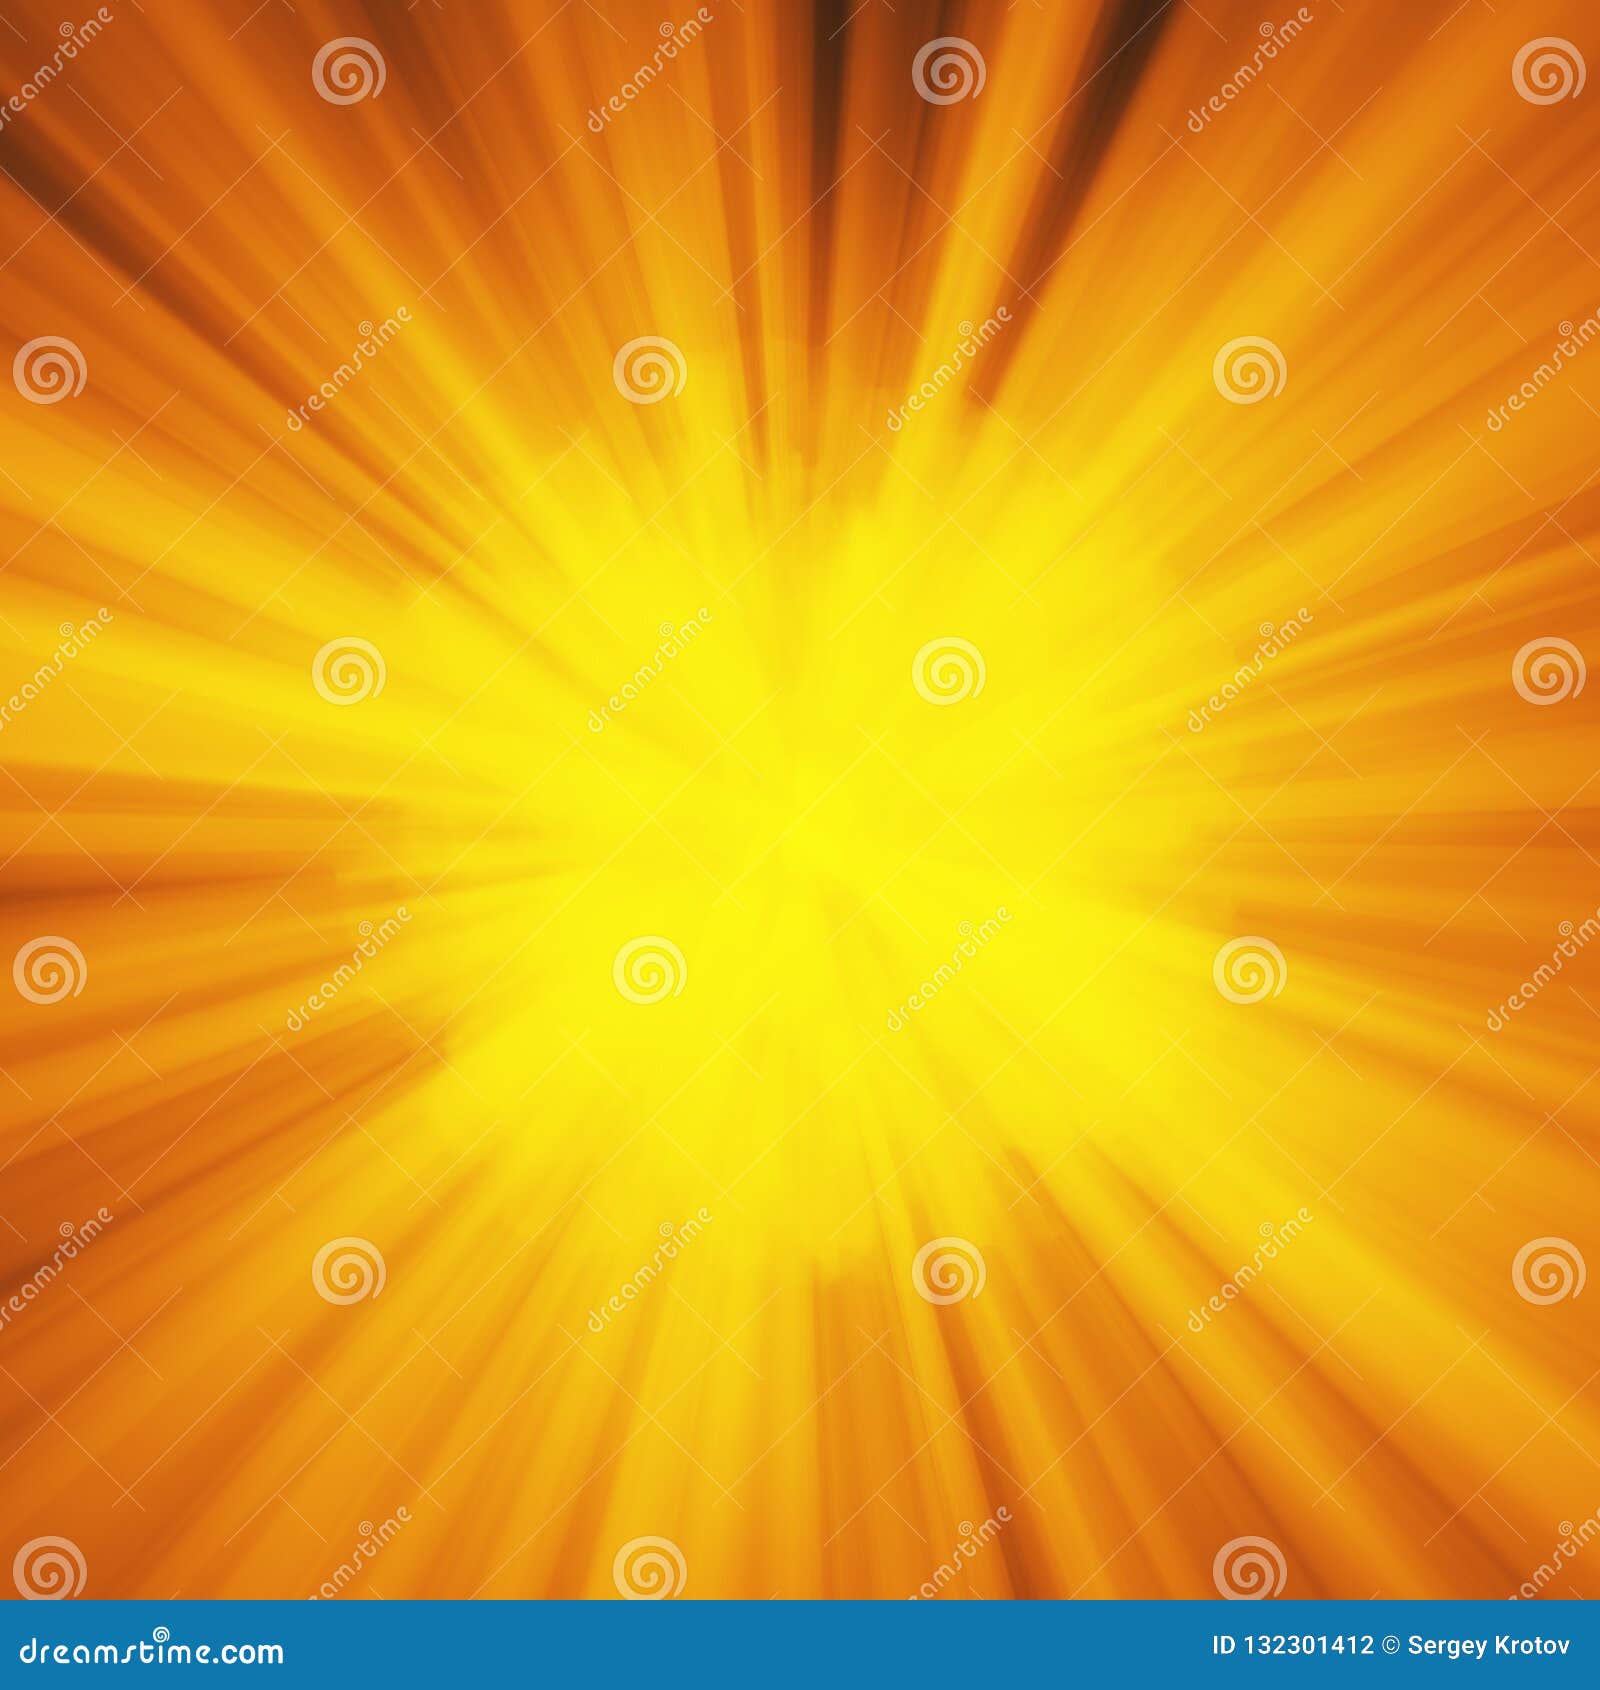 Background with Abstract Explosion or Hyperspeed Warp Sun God Rays. Bright  Orange Yellow Light Strip Burst, Flash Ray Stock Illustration -  Illustration of boom, background: 132301412